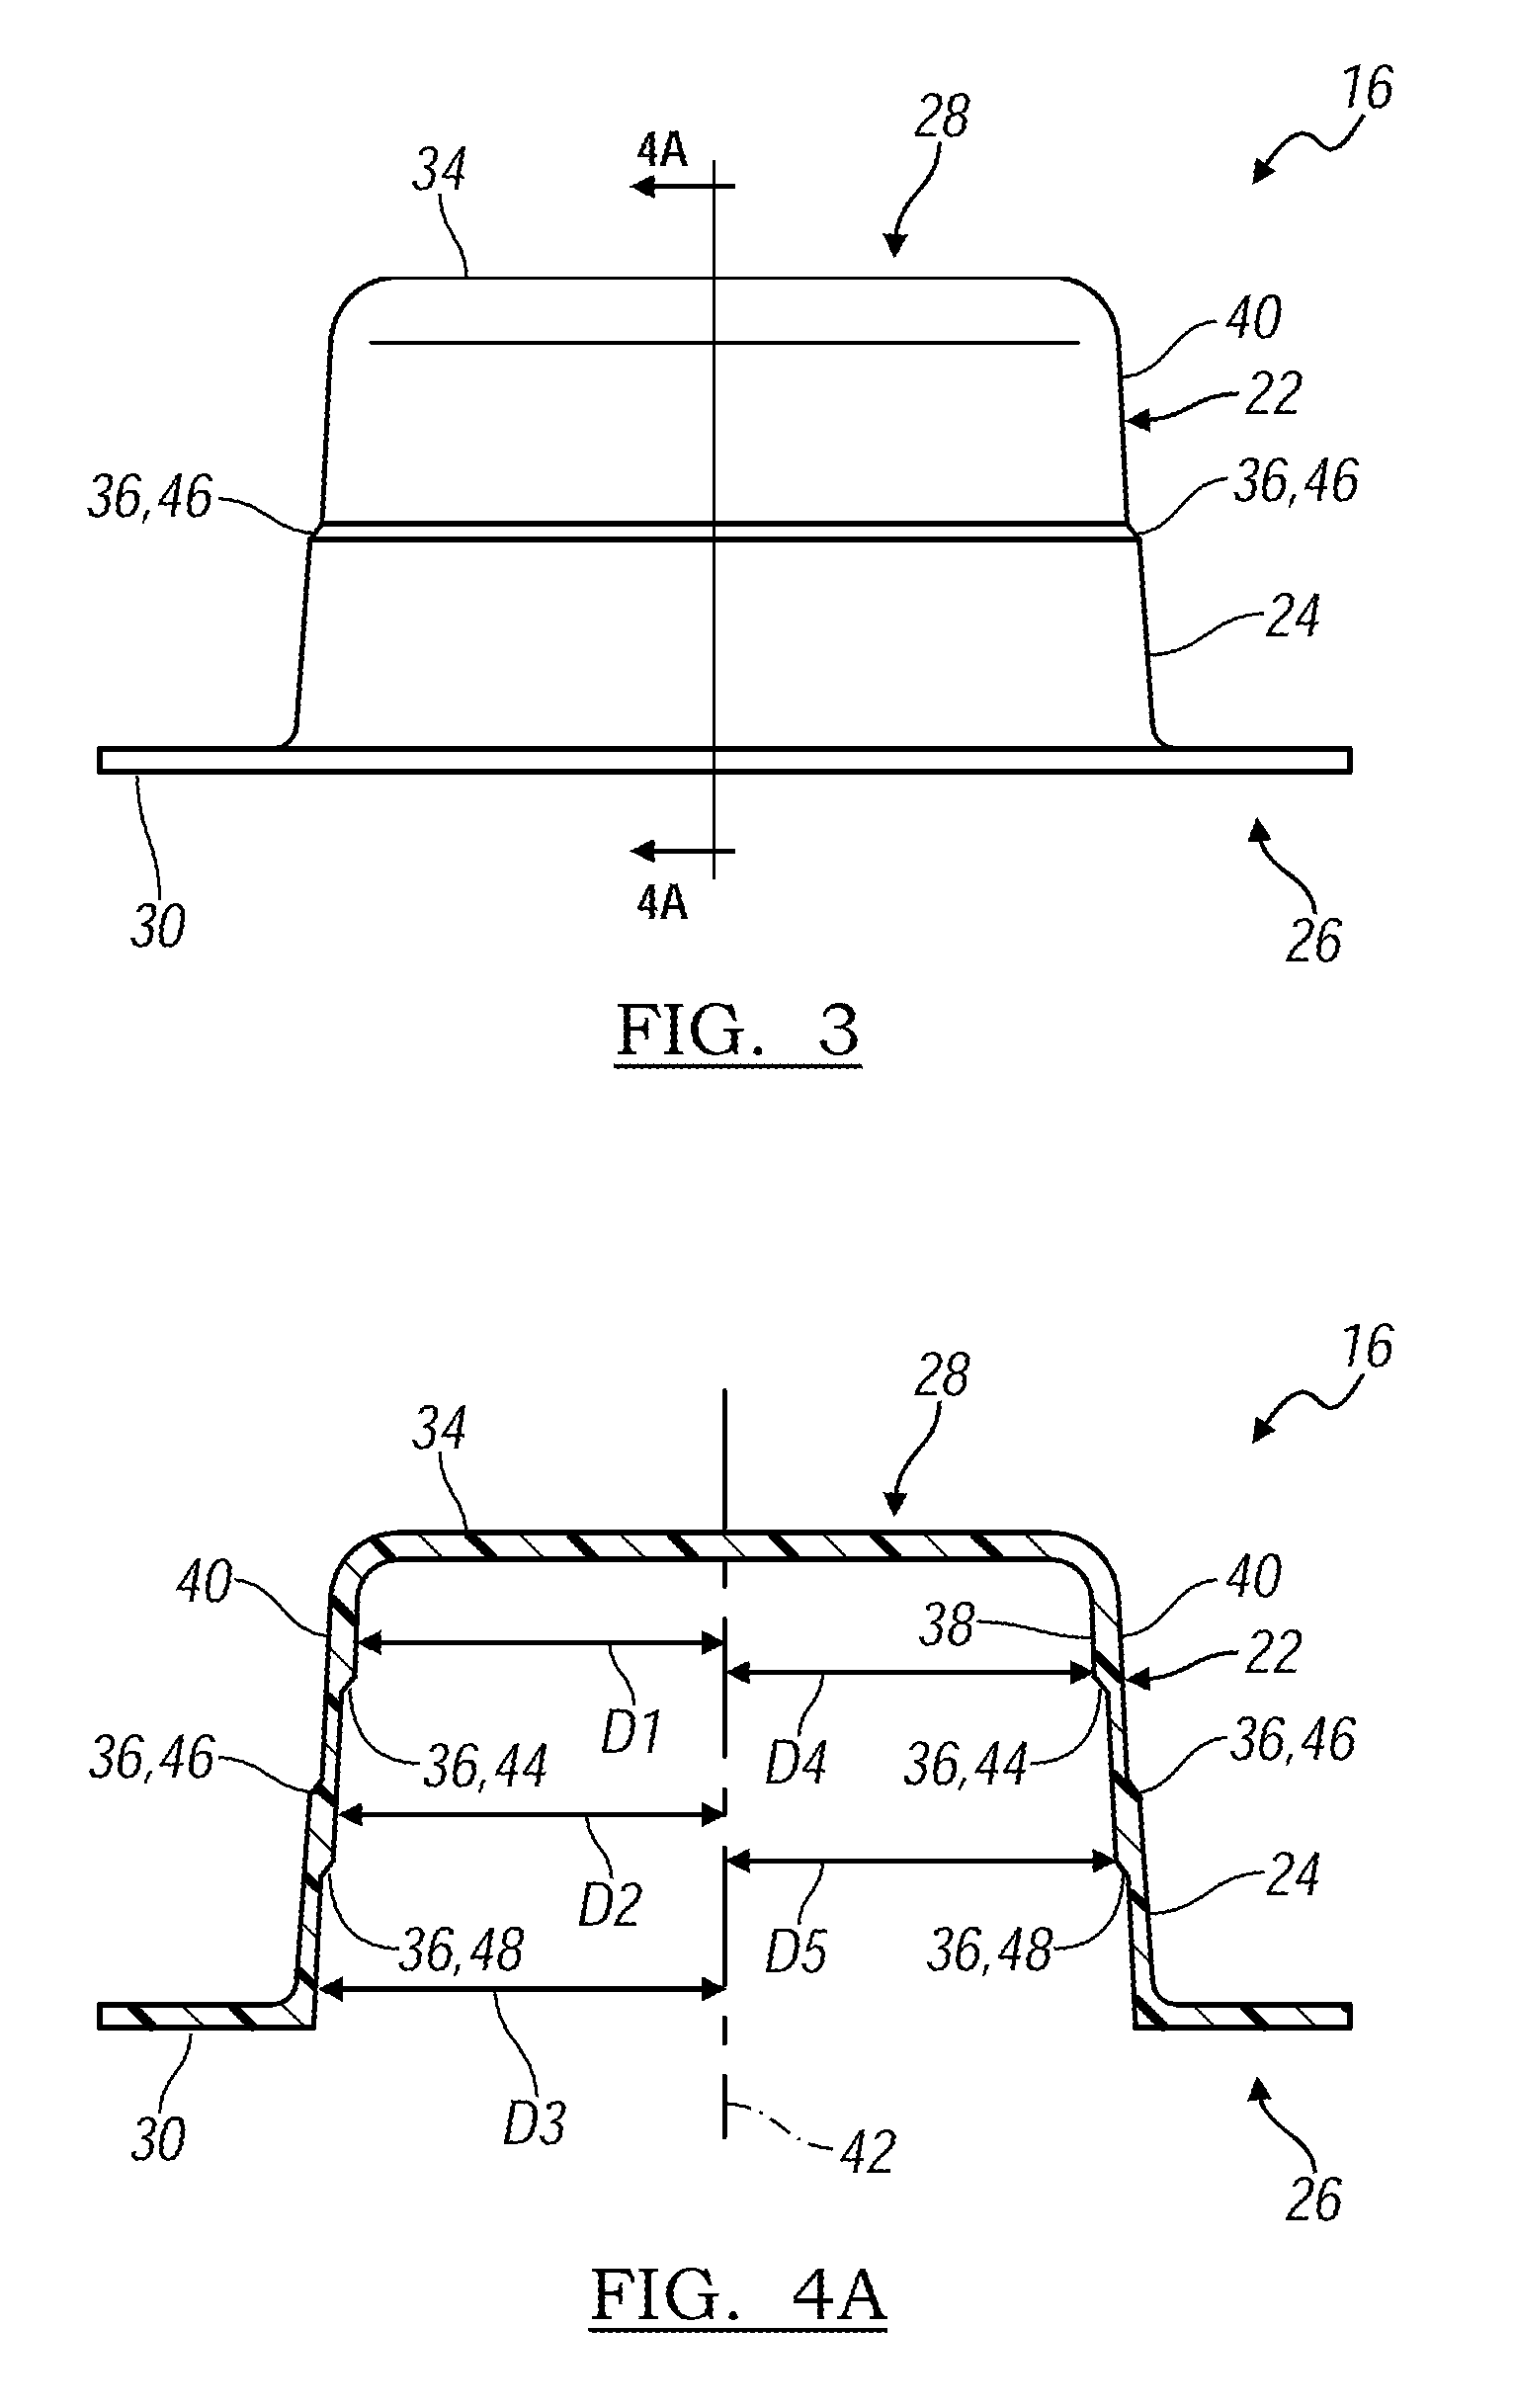 Energy absorbing component